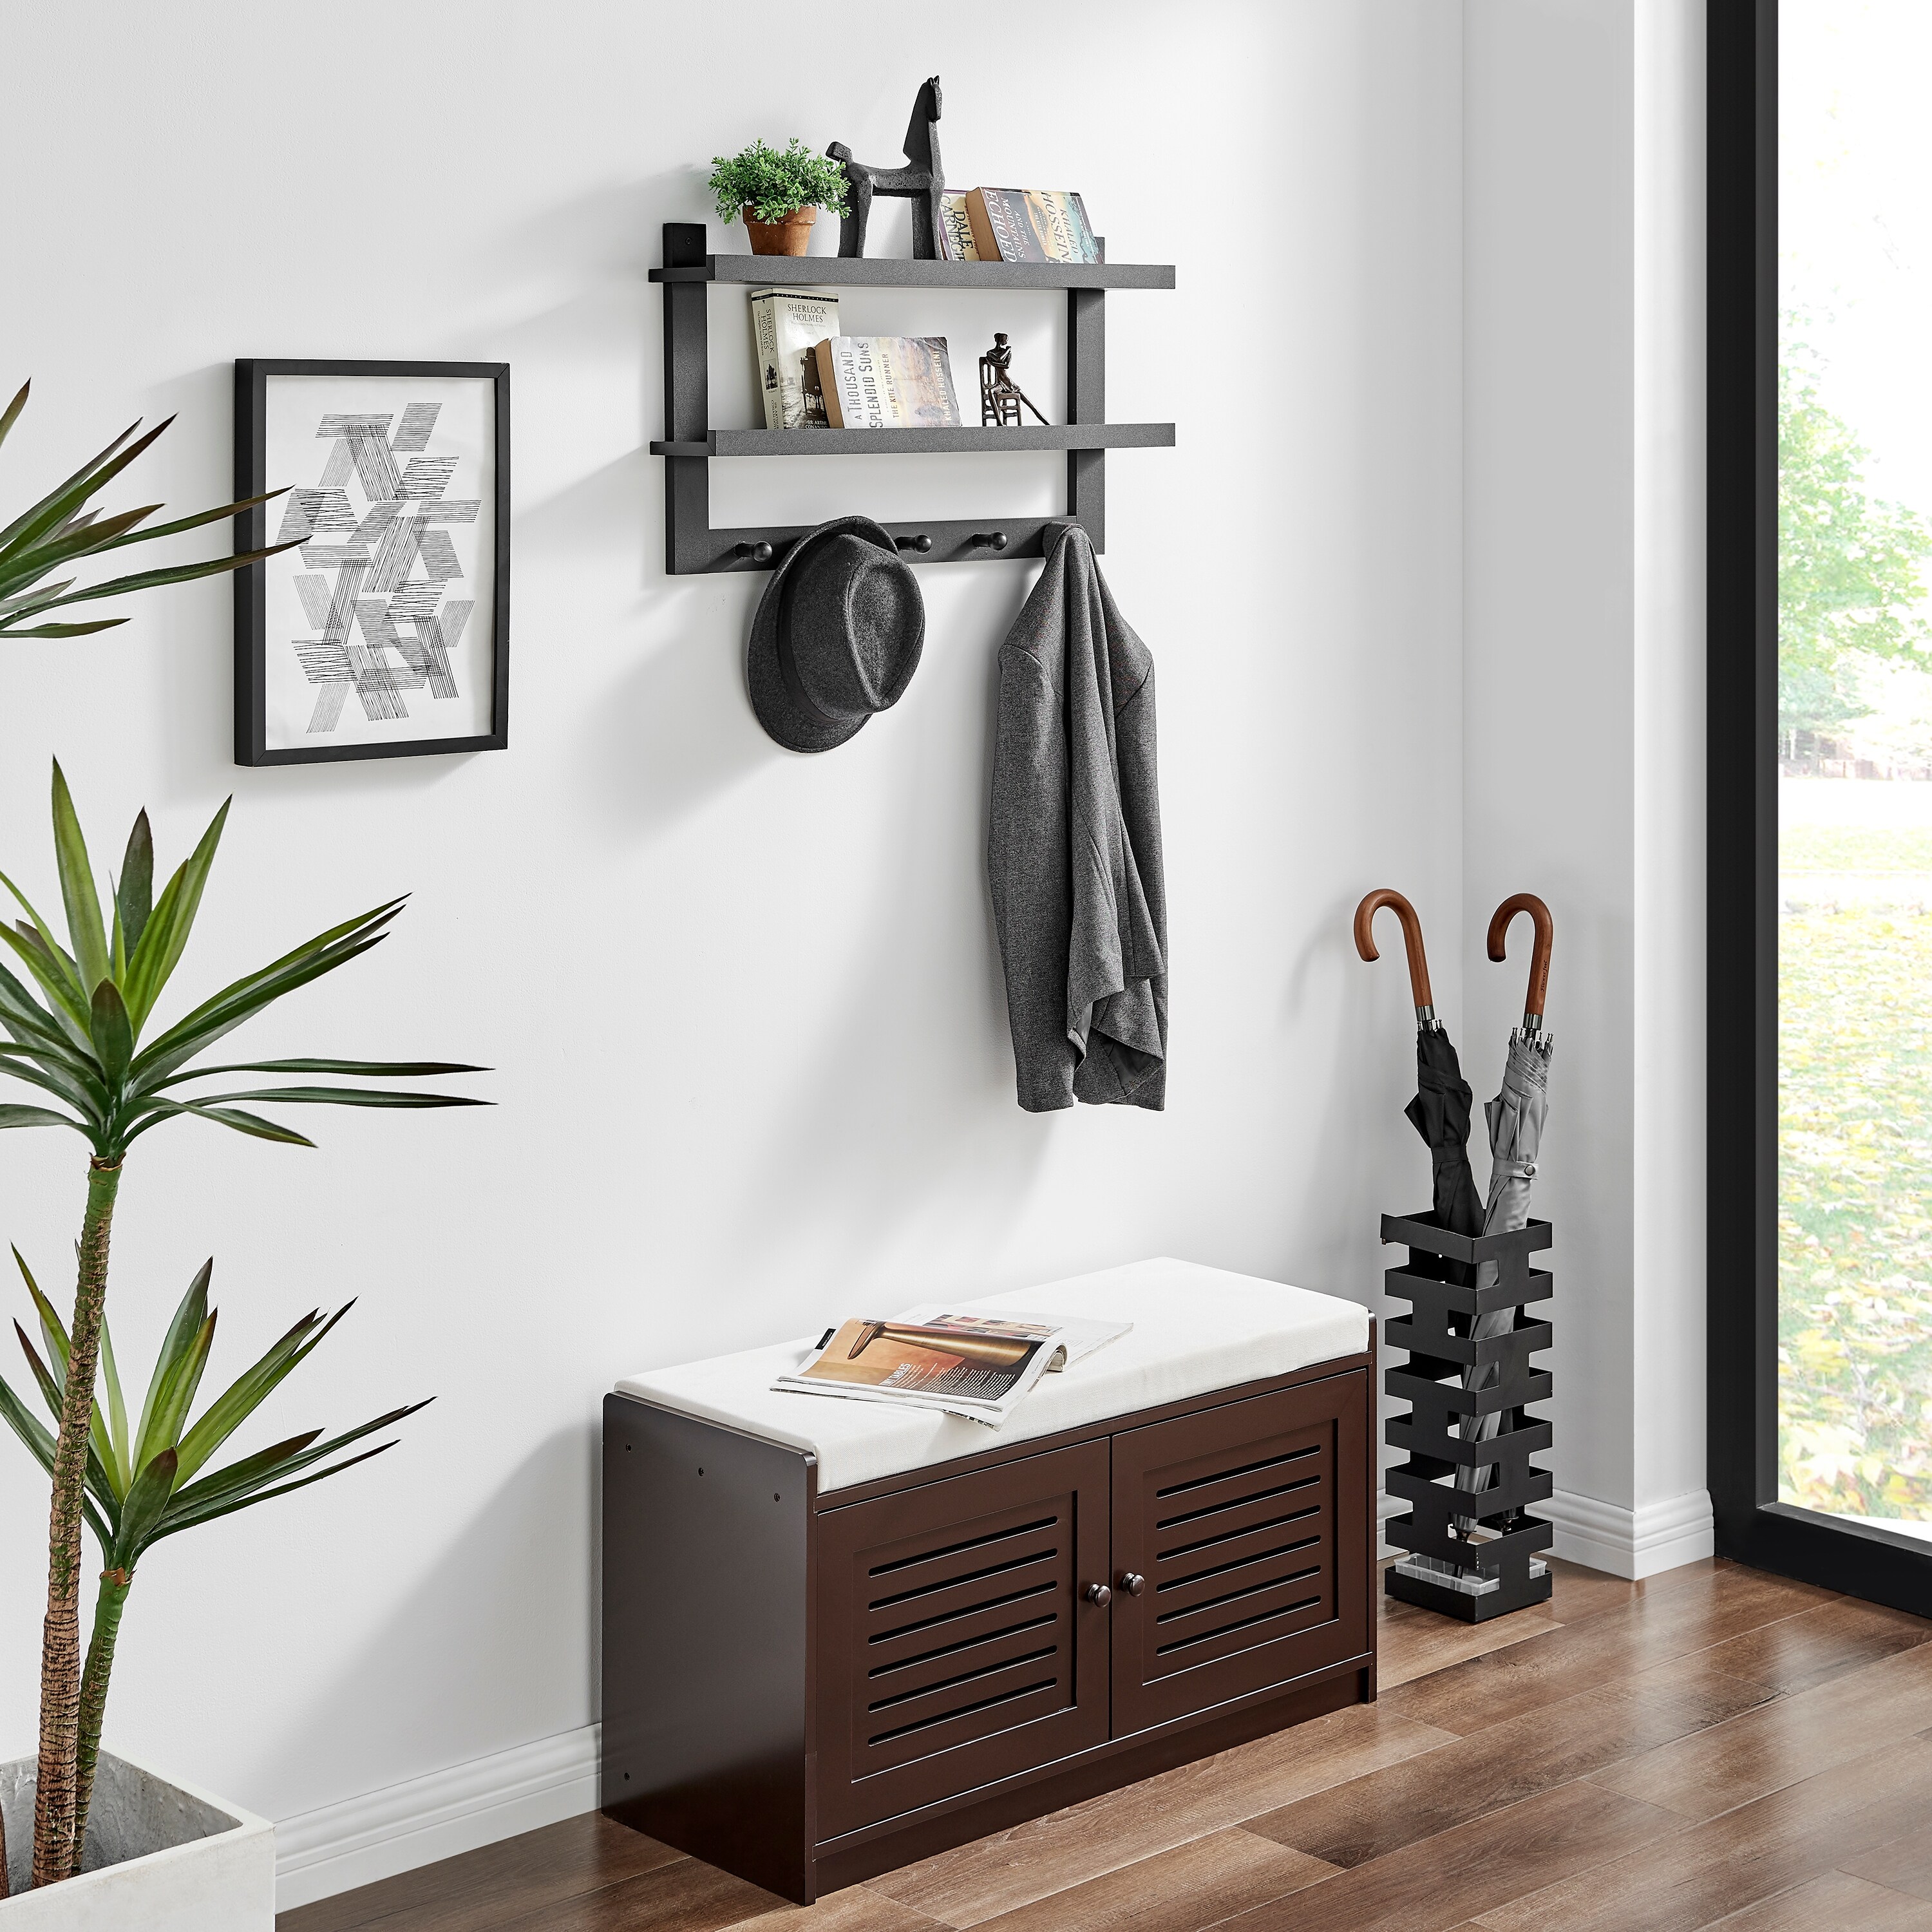 https://ak1.ostkcdn.com/images/products/is/images/direct/67aa1f45653d88592ef0fbd1a4d9a5143cf312ee/Danya-B.-Two-Tier-Ledge-Shelf-Wall-Organizer-with-Five-Hanging-Hooks---Entryway-or-Bathroom.jpg